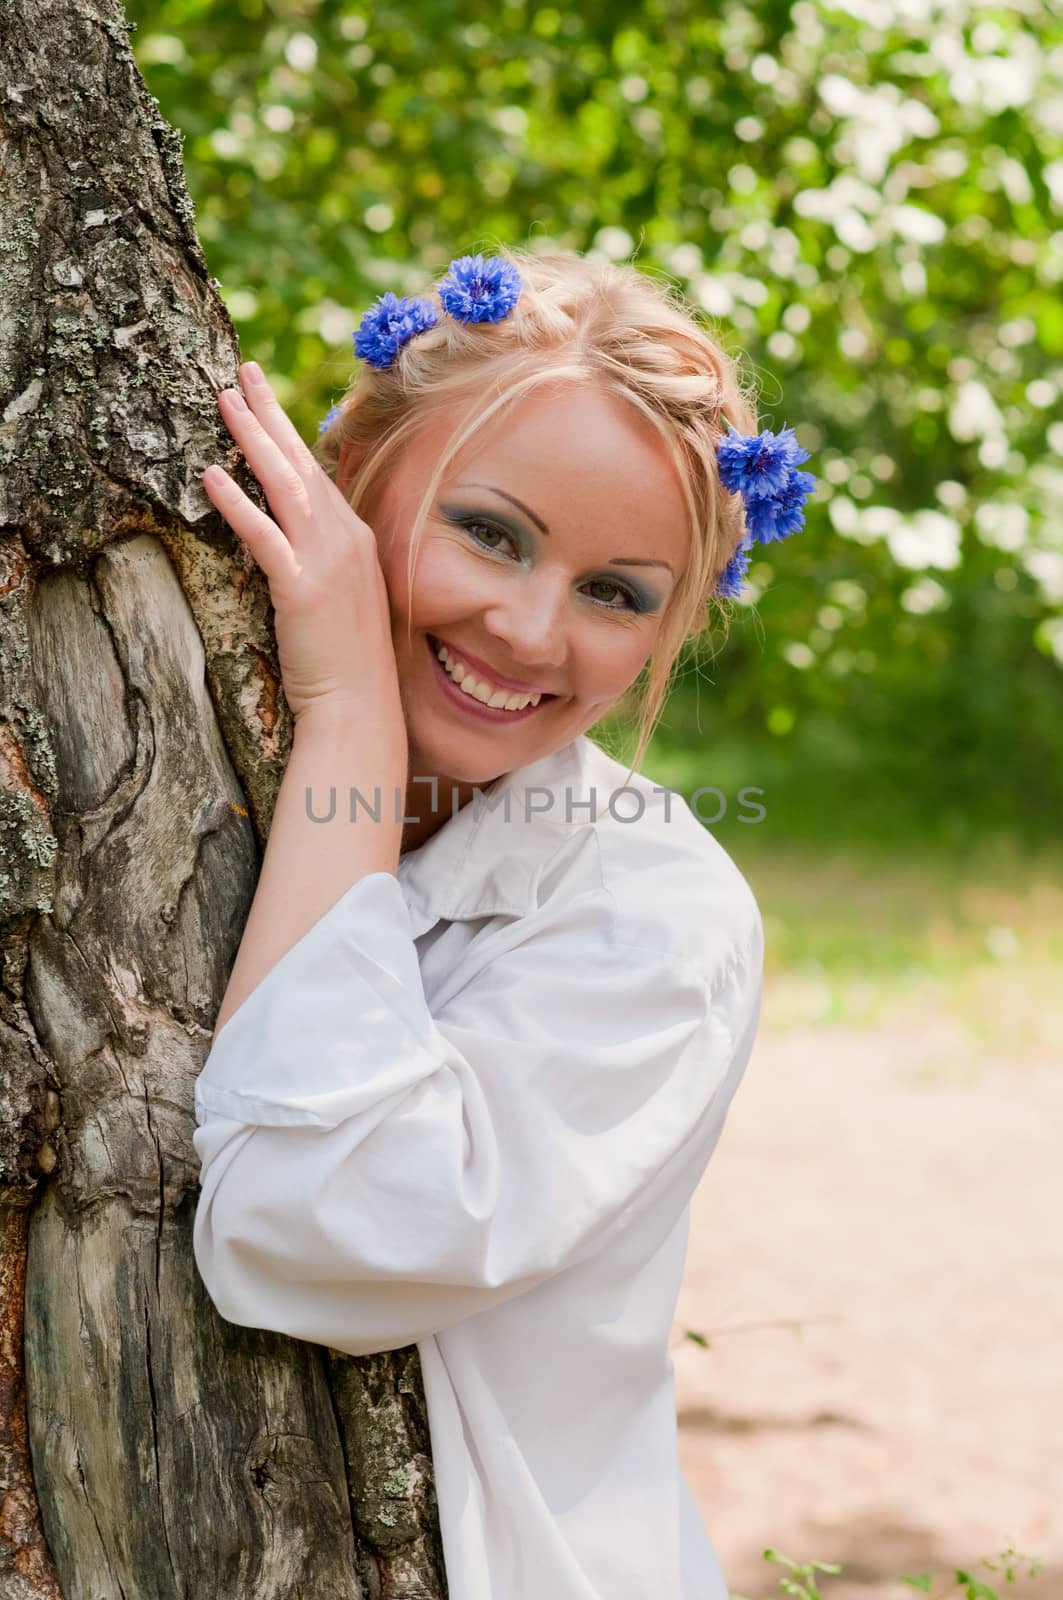 Smiling female in wreath from blue flowers near the tree